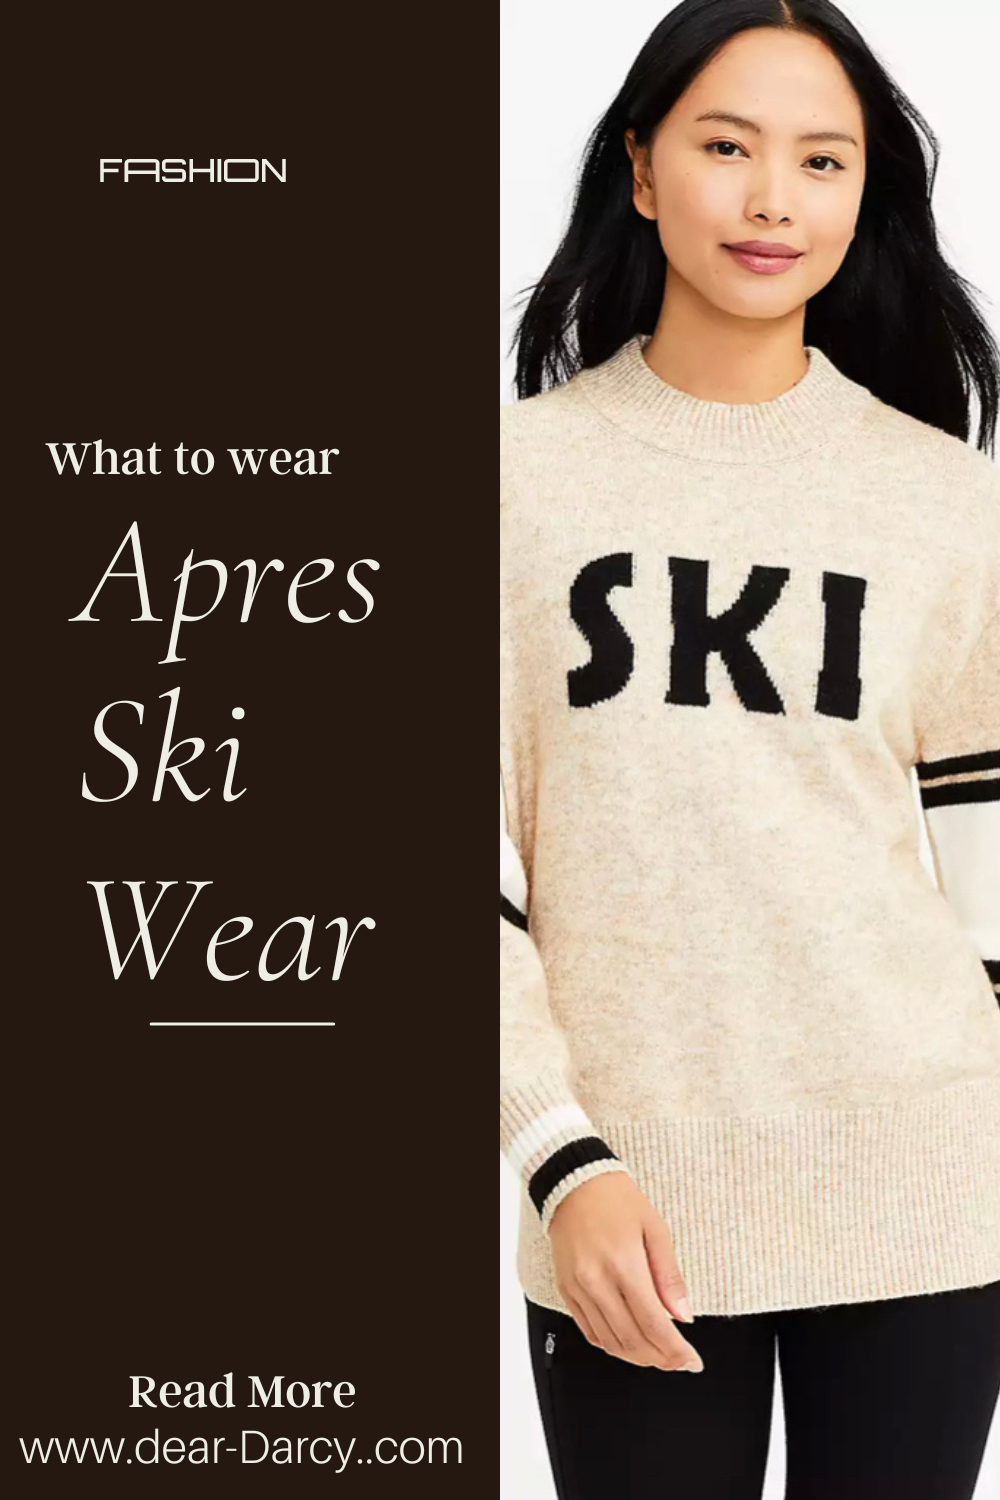 What to wear for Apres Ski